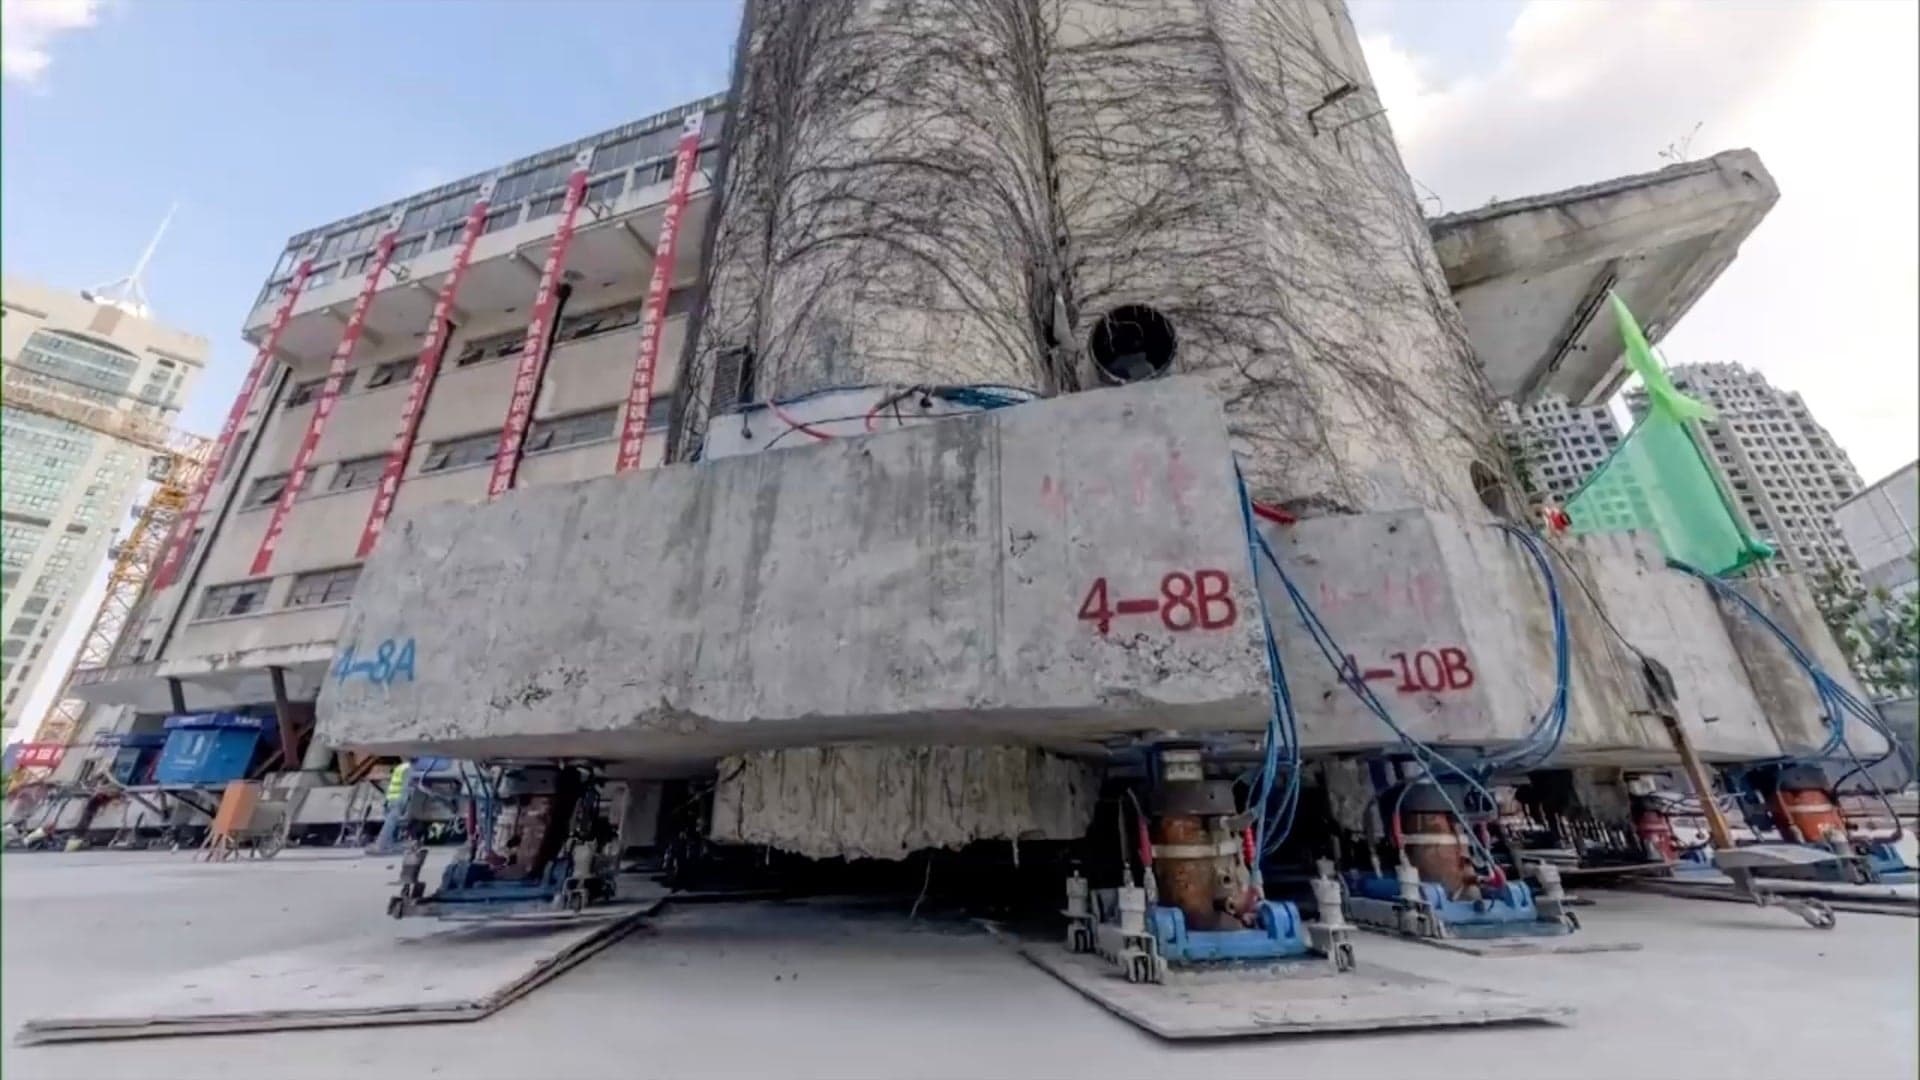 Watch a Giant ‘Walking Machine’ Relocate an Entire Five-Story School Building